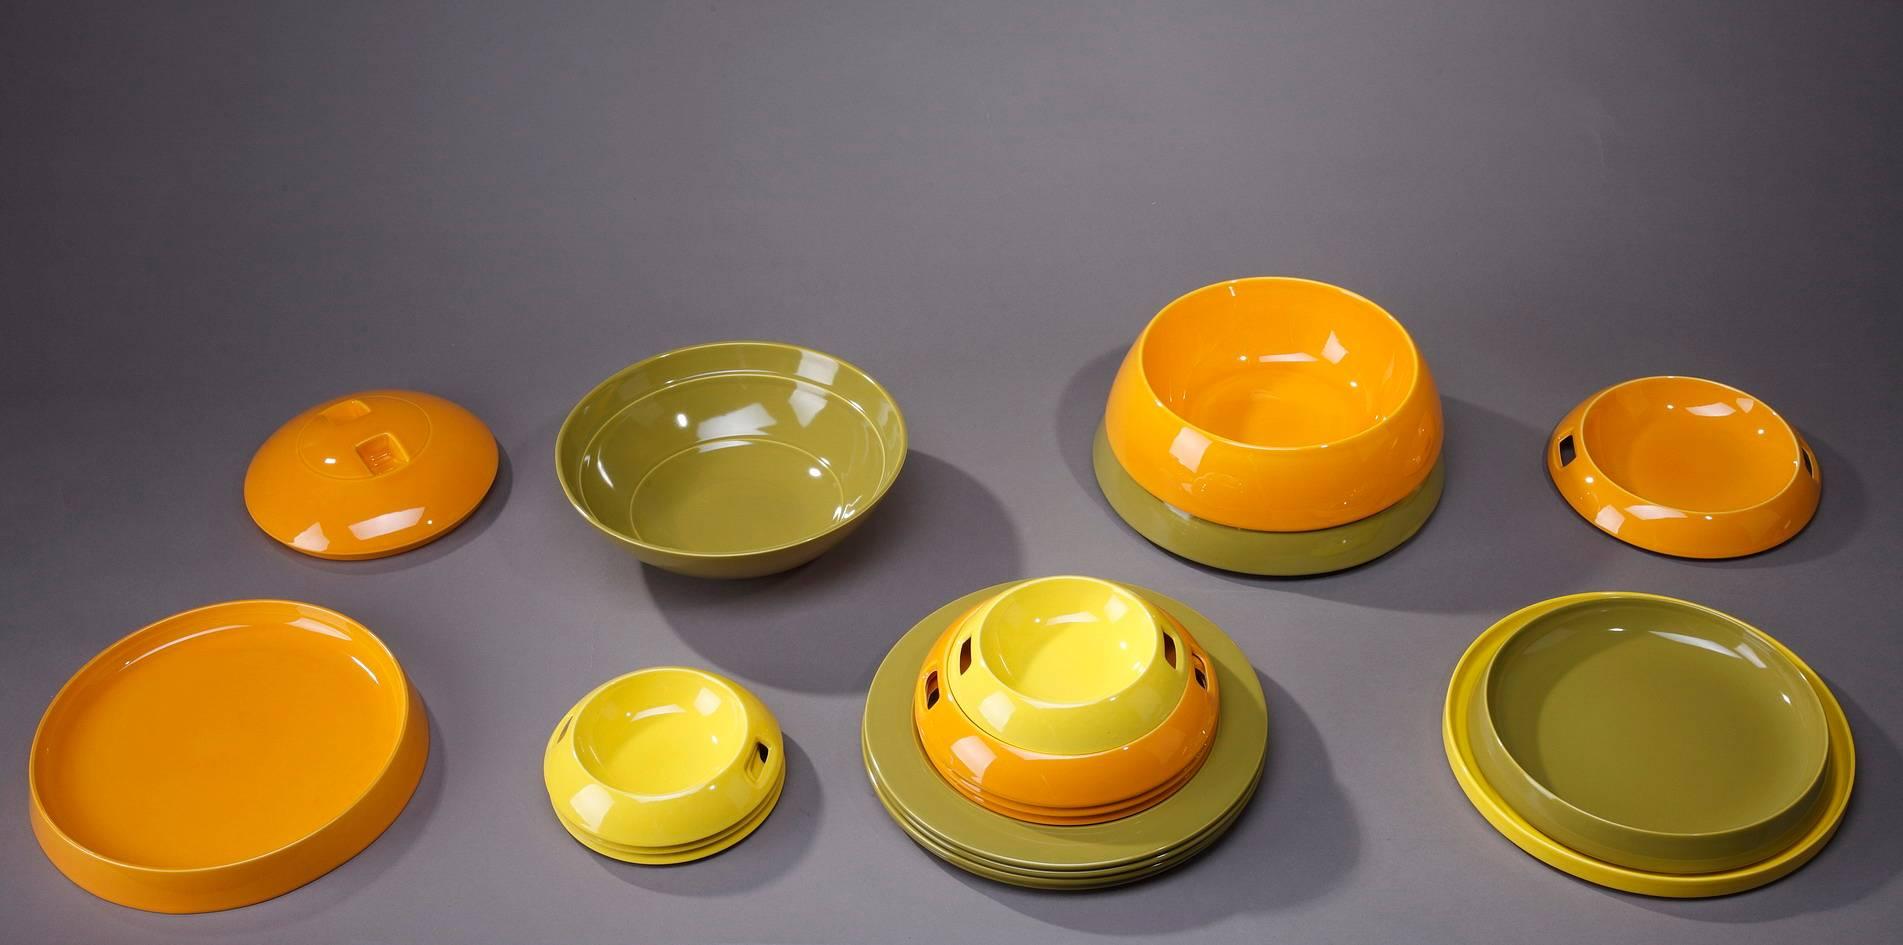 Yellow, orange and olive green glazed ceramic dish ball including 19 individual pieces (bowls and plates) for four people. La Boule or Die Kugel was designed by Helen von Boch in 1971 for Villeroy & Boch. Each piece is stamped Villeroy & Boch,